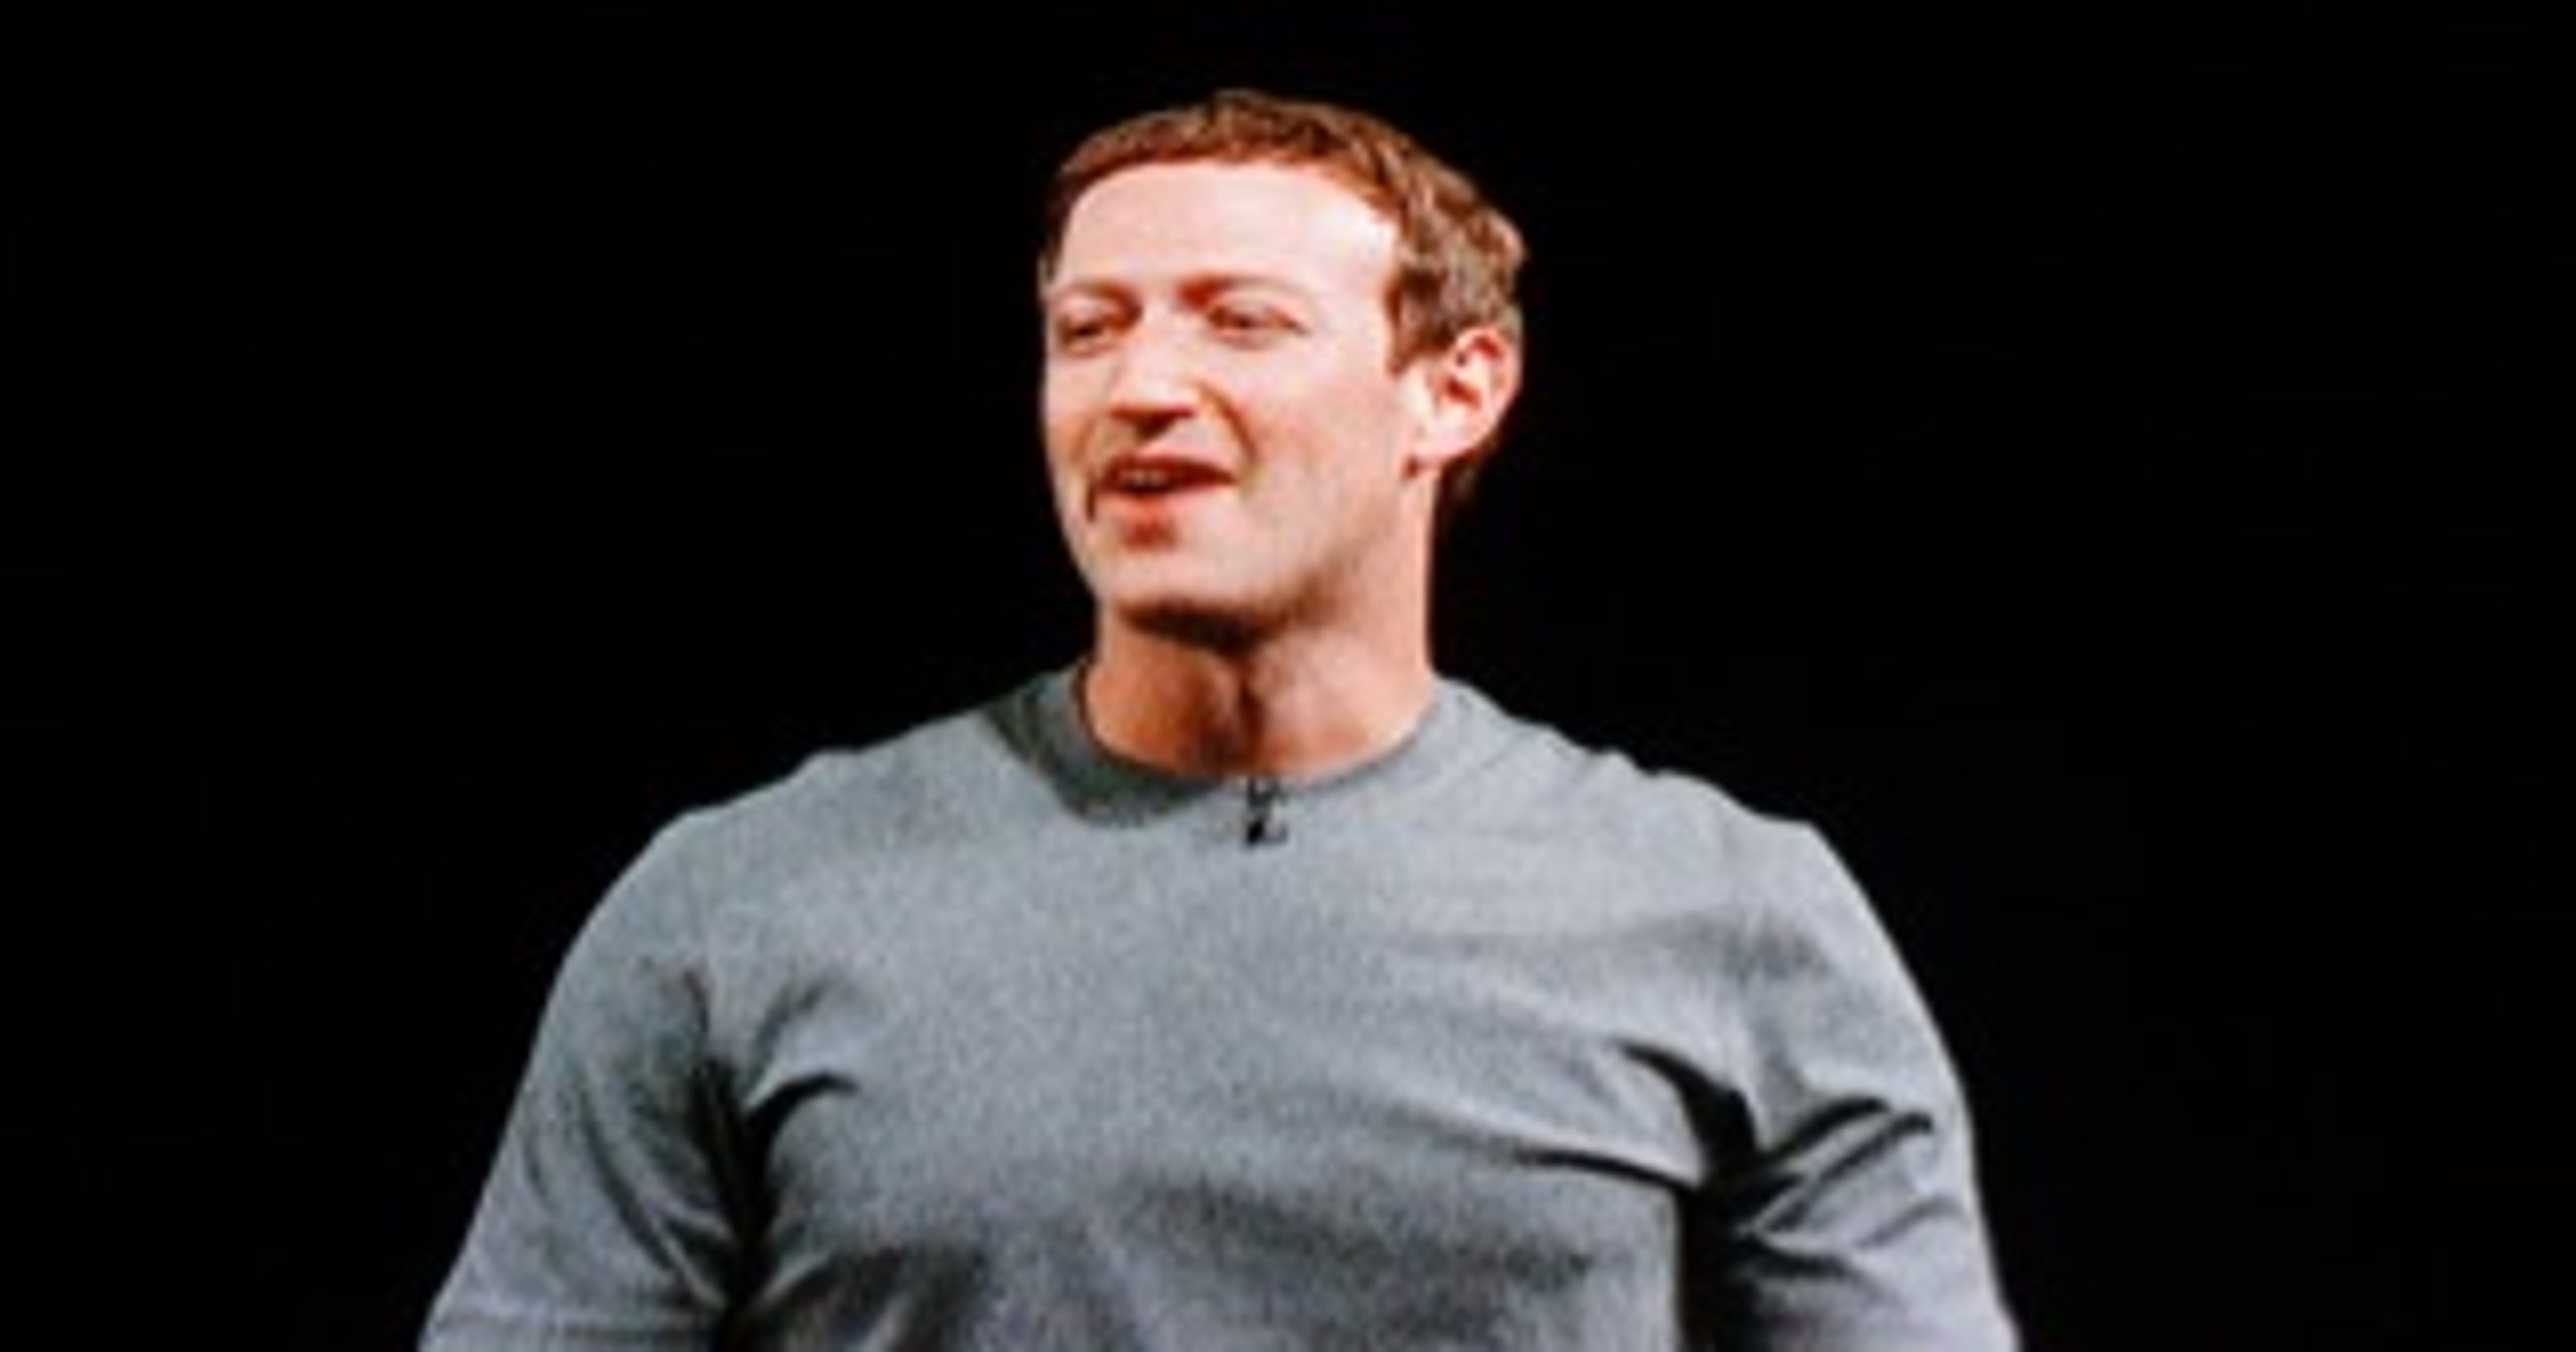 Mark Zuckerberg: Virtual reality can become the most social platform